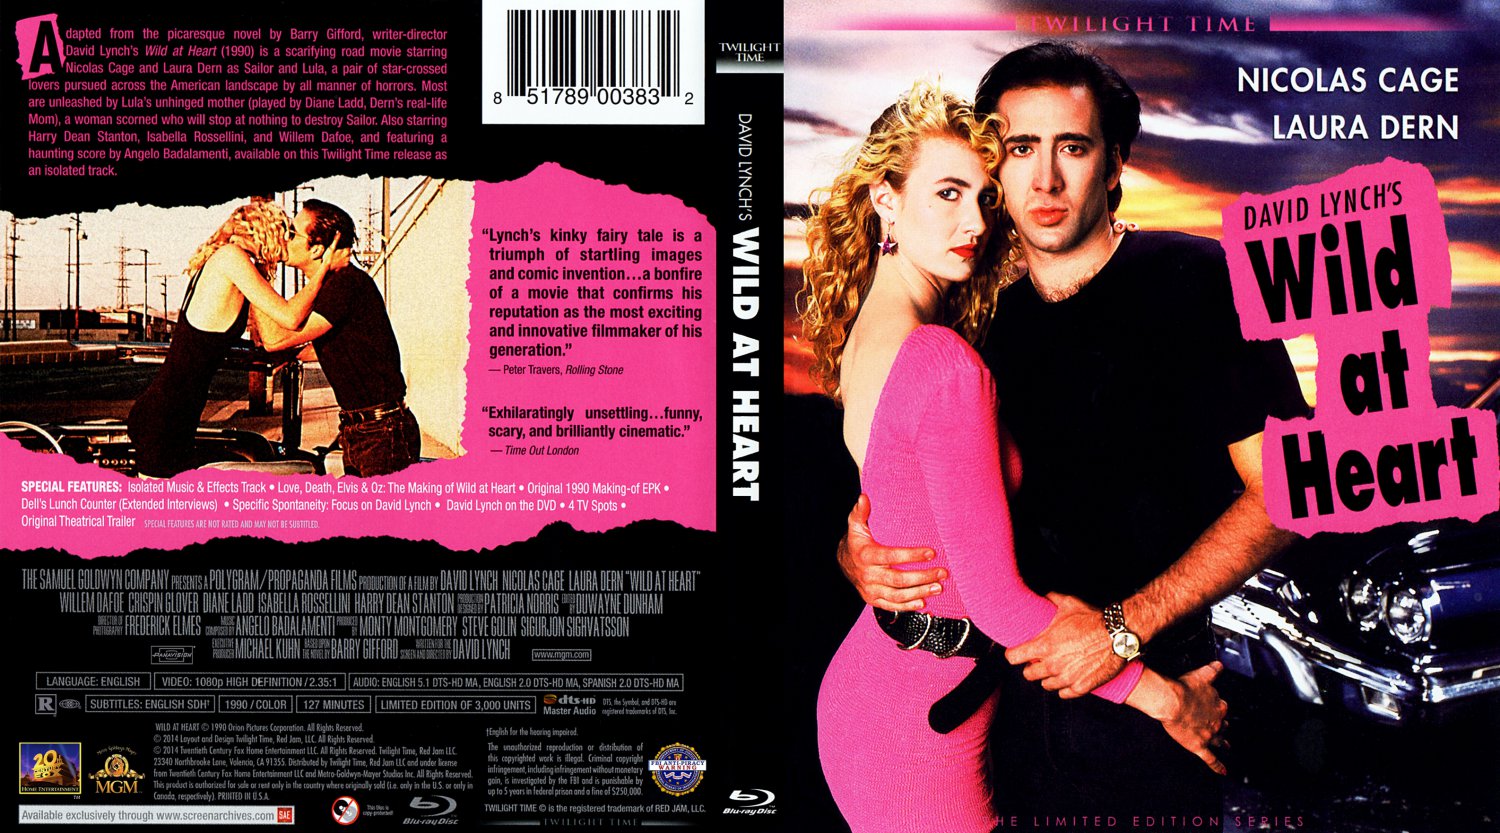 wild at heart streaming